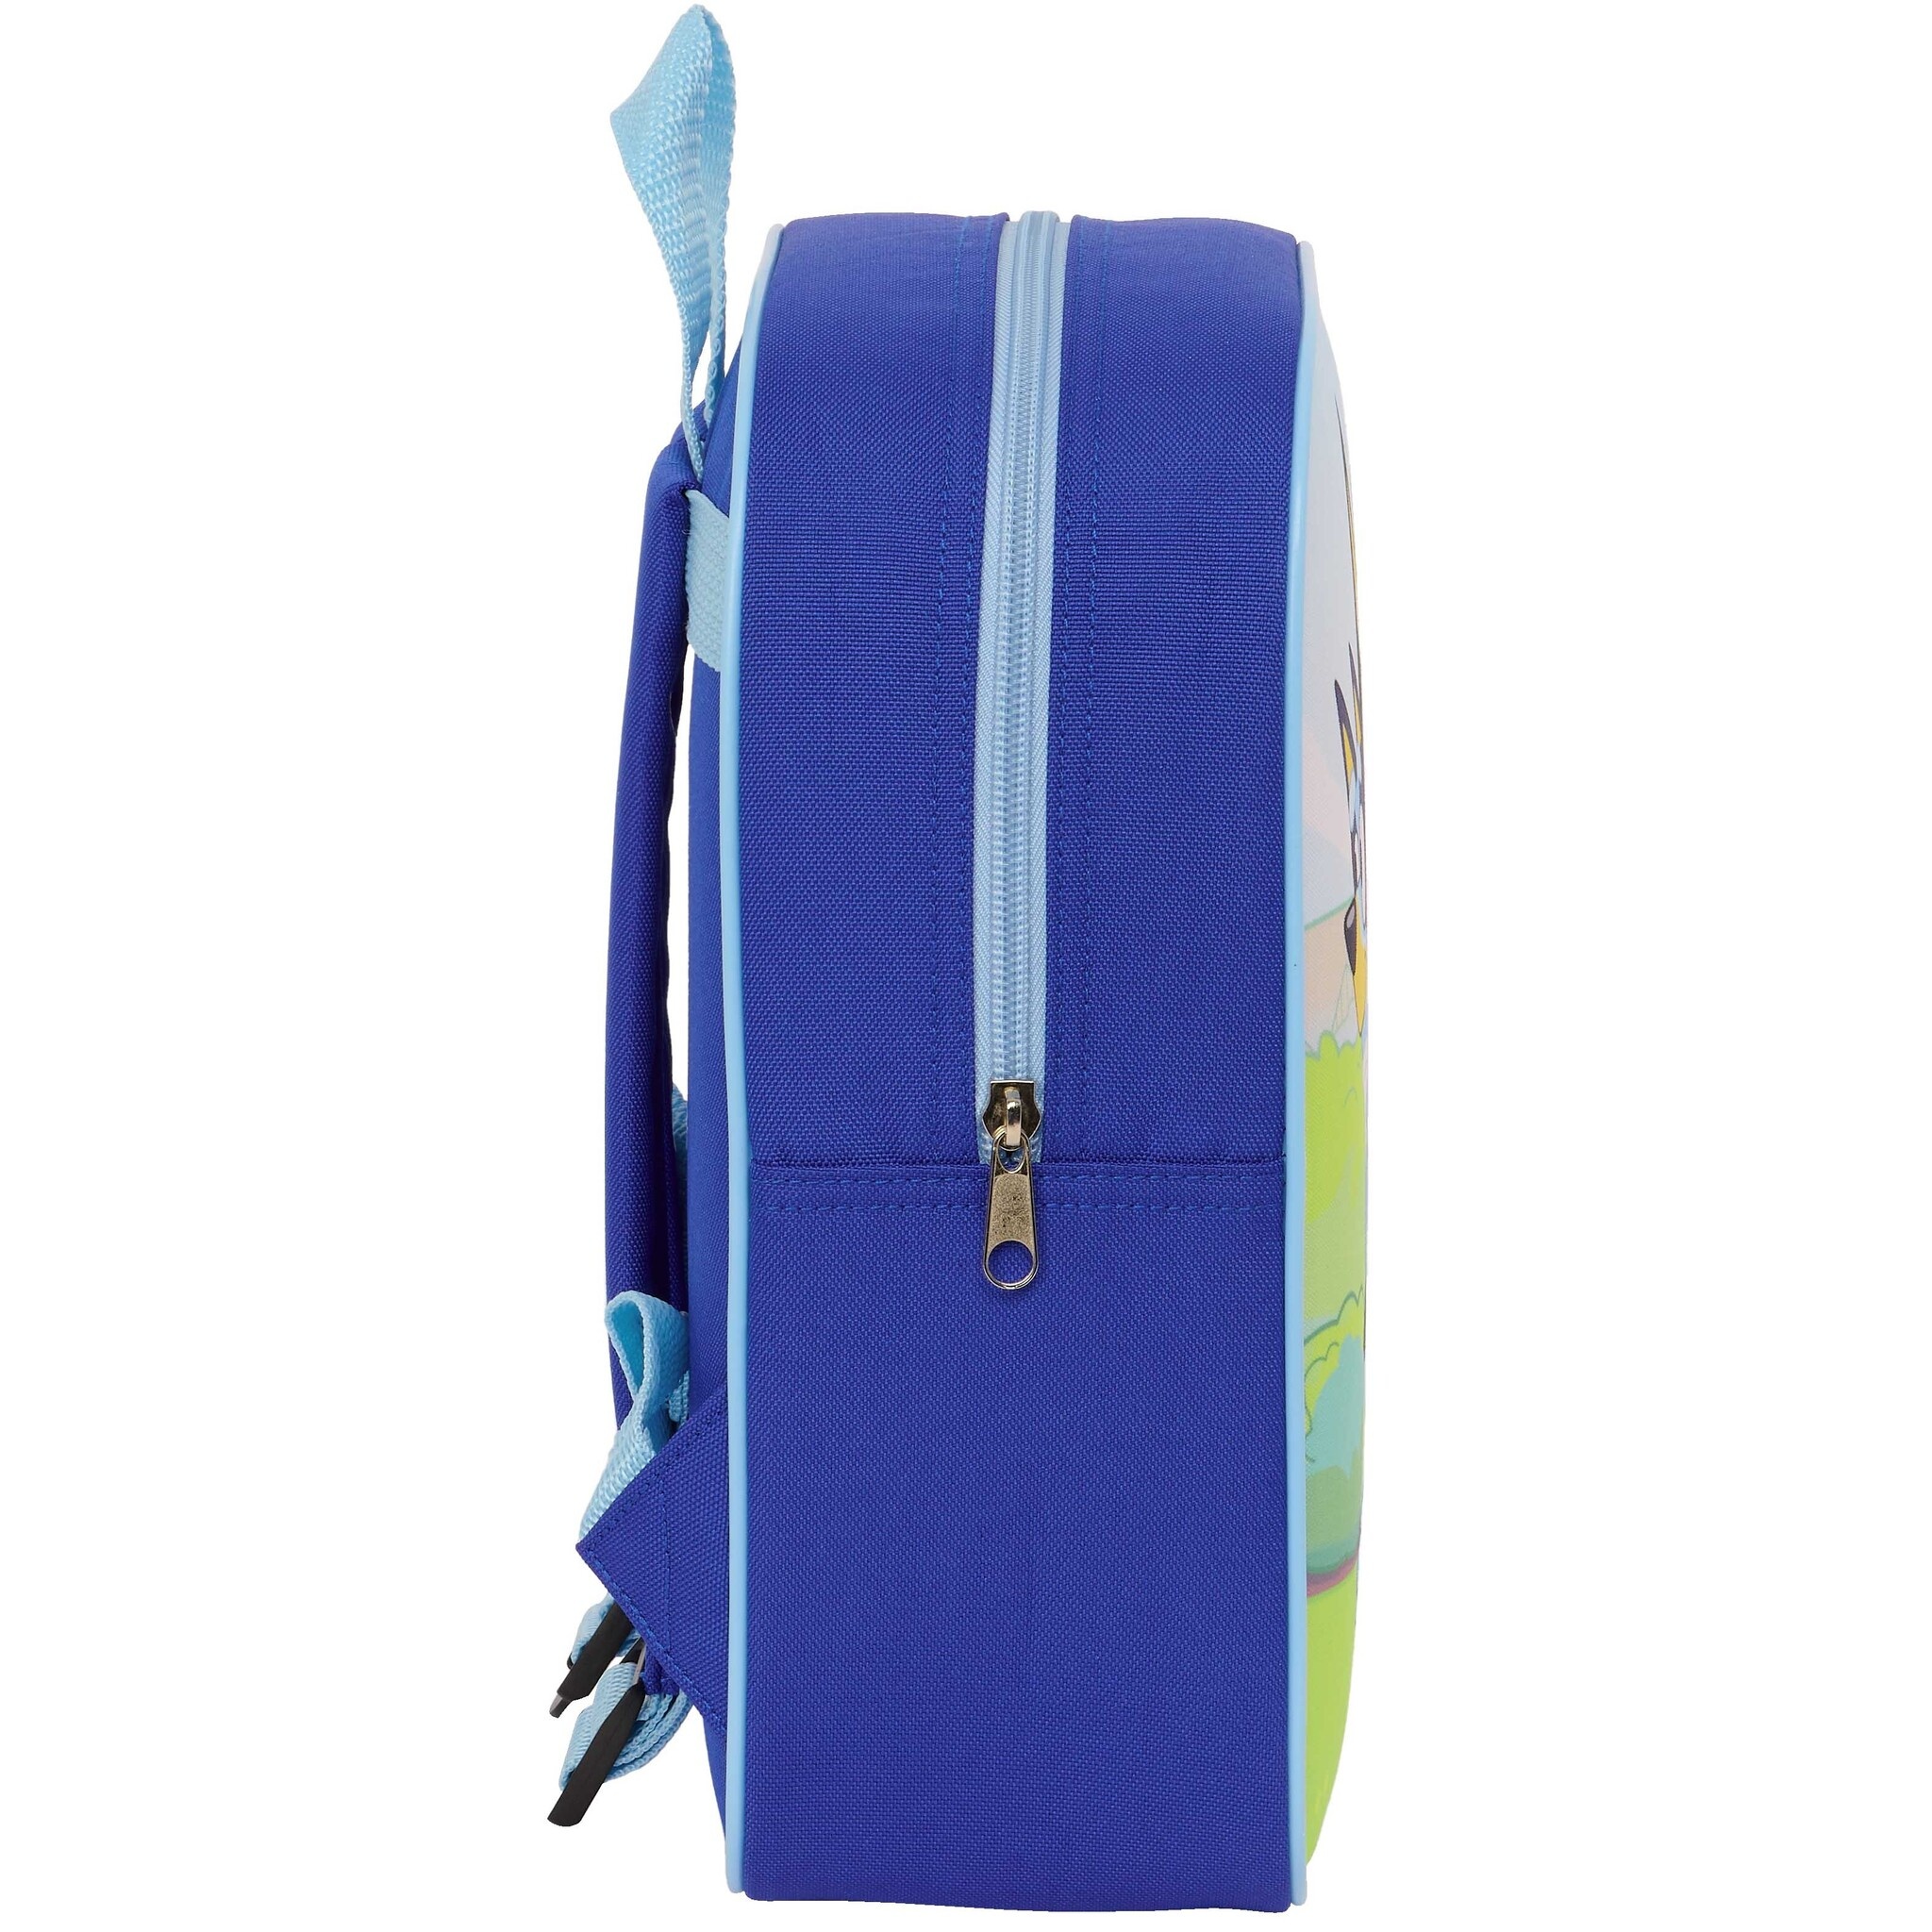 Bluey Toddler backpack, Happy - 27 x 22 x 10 cm - Polyester